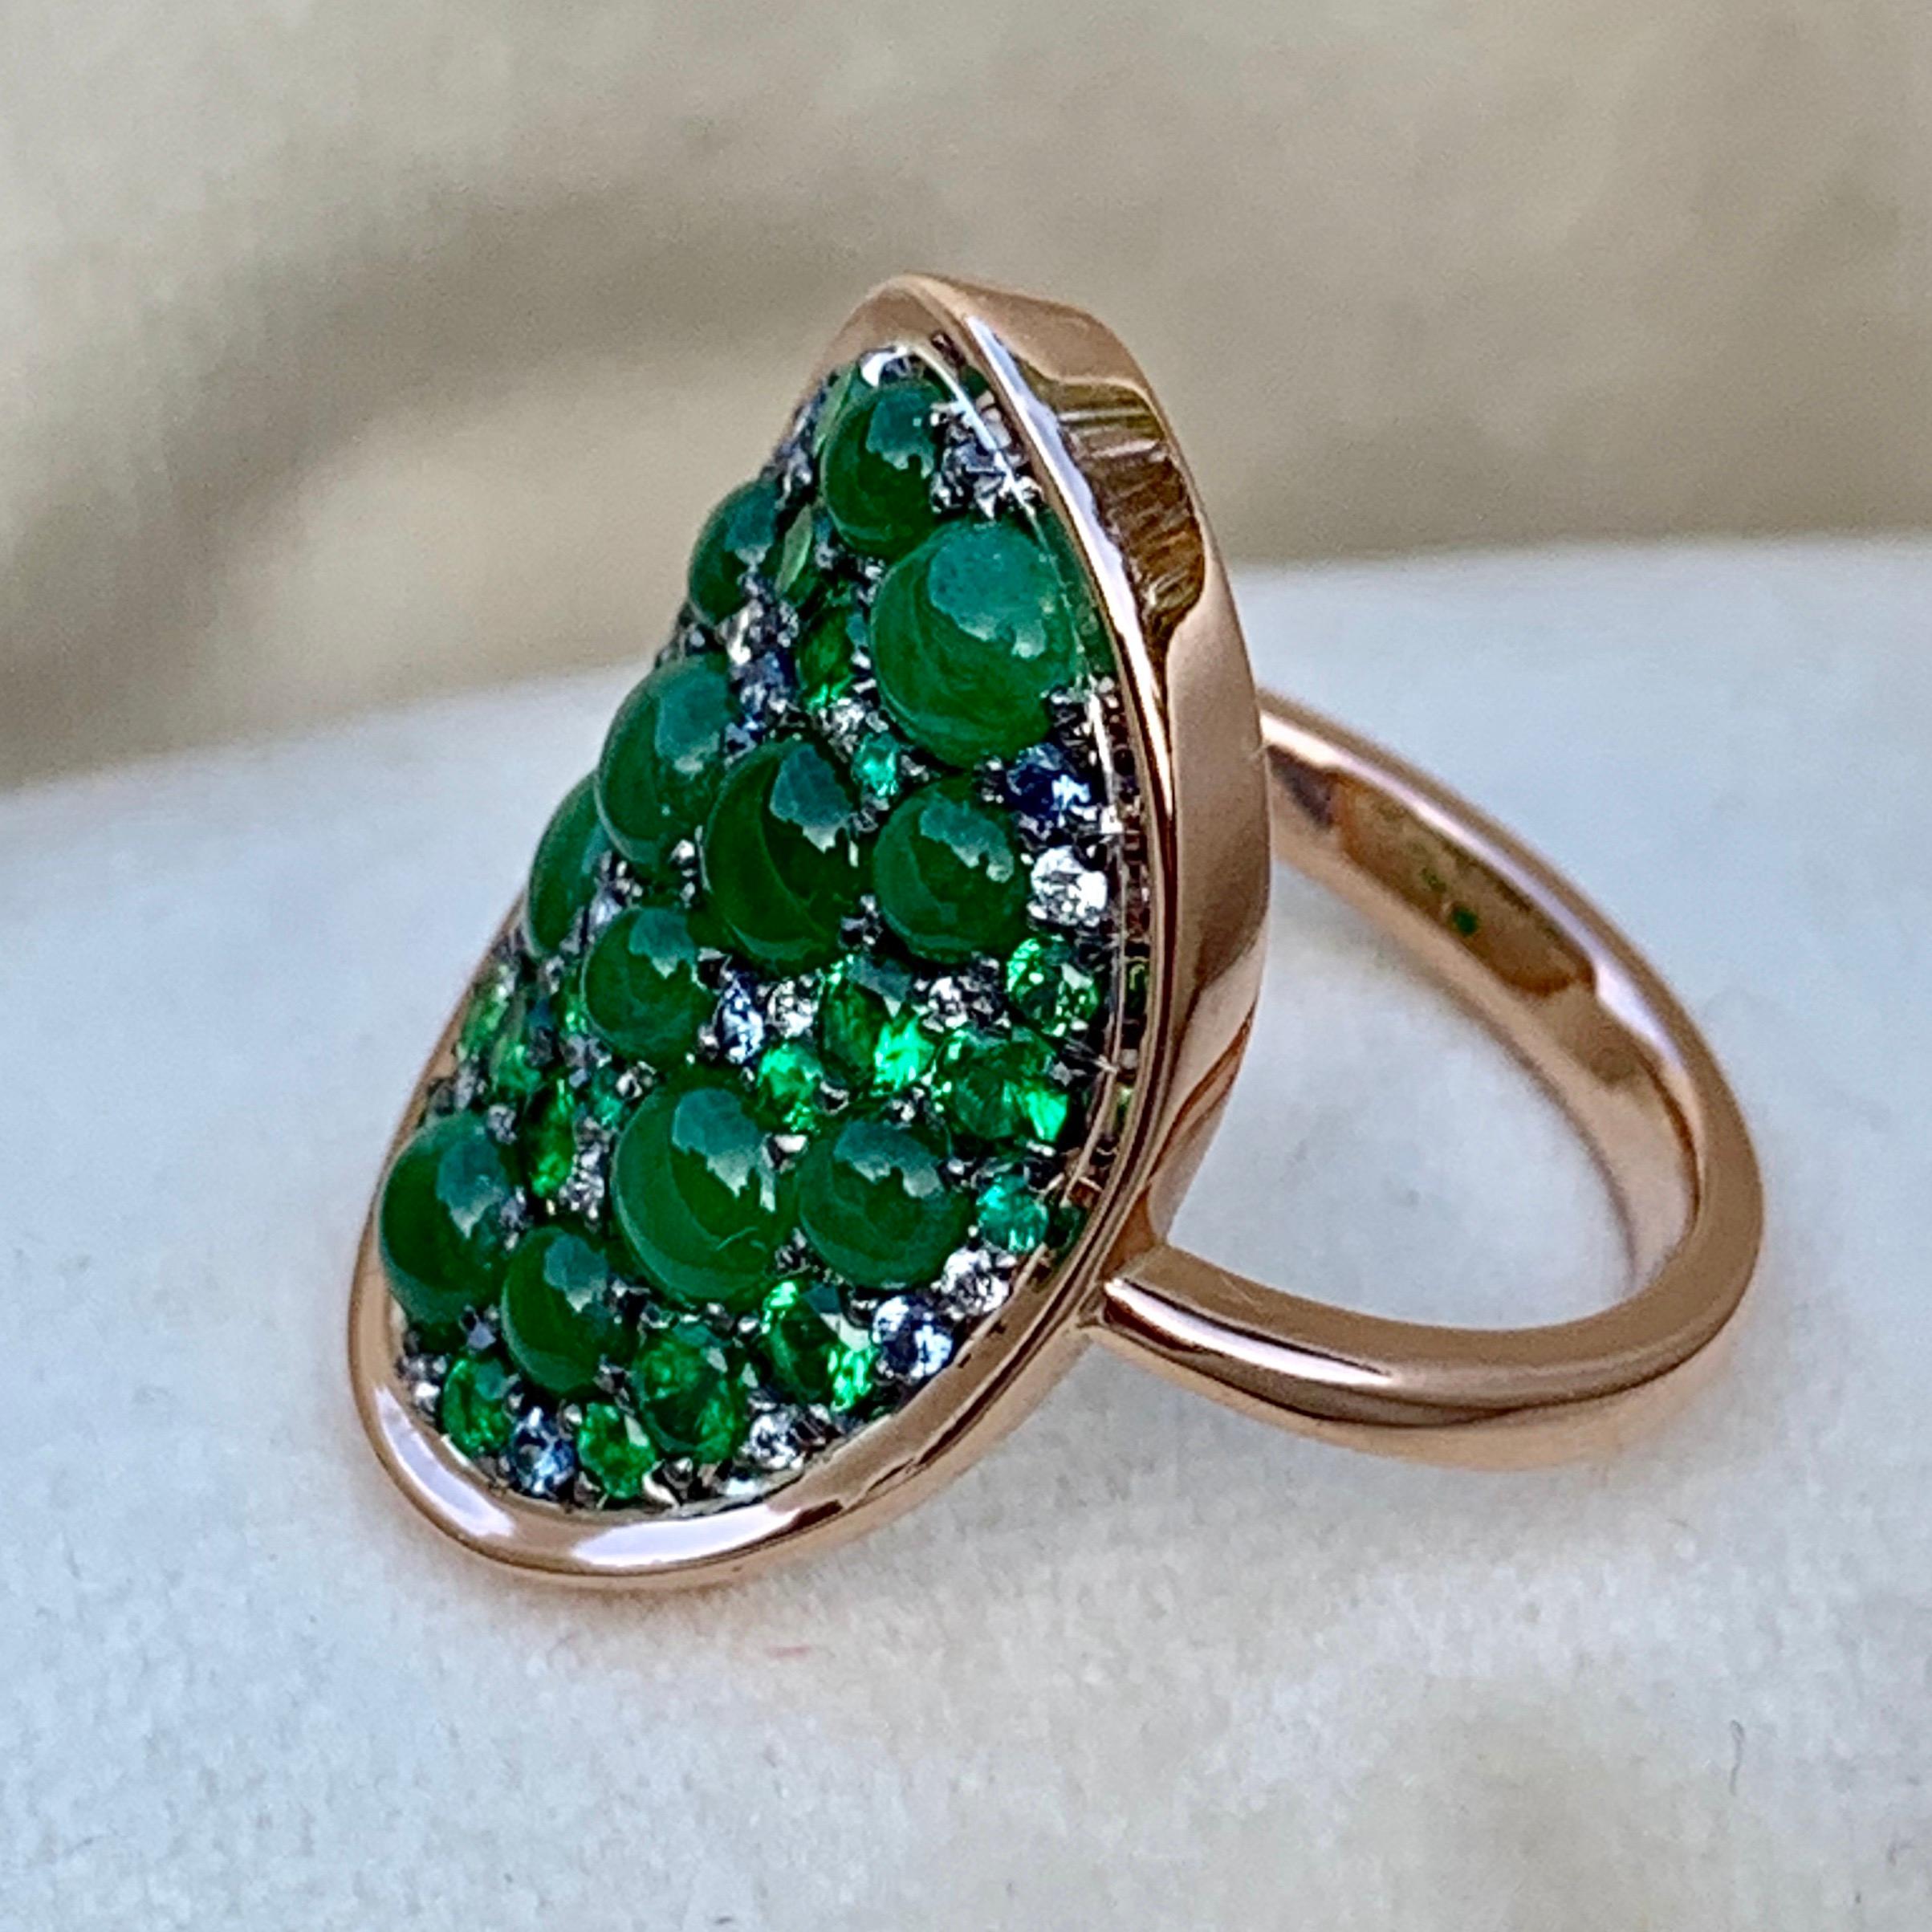 One of a kind handmade ring in 18K Rose gold 6,4 g & blackened sterling silver (The stones are set on silver to create a black background for the stones)
Pave set with natural & untreated translucent Burmese Jadeite cabochons, Tsavorite 0,86 ct.,